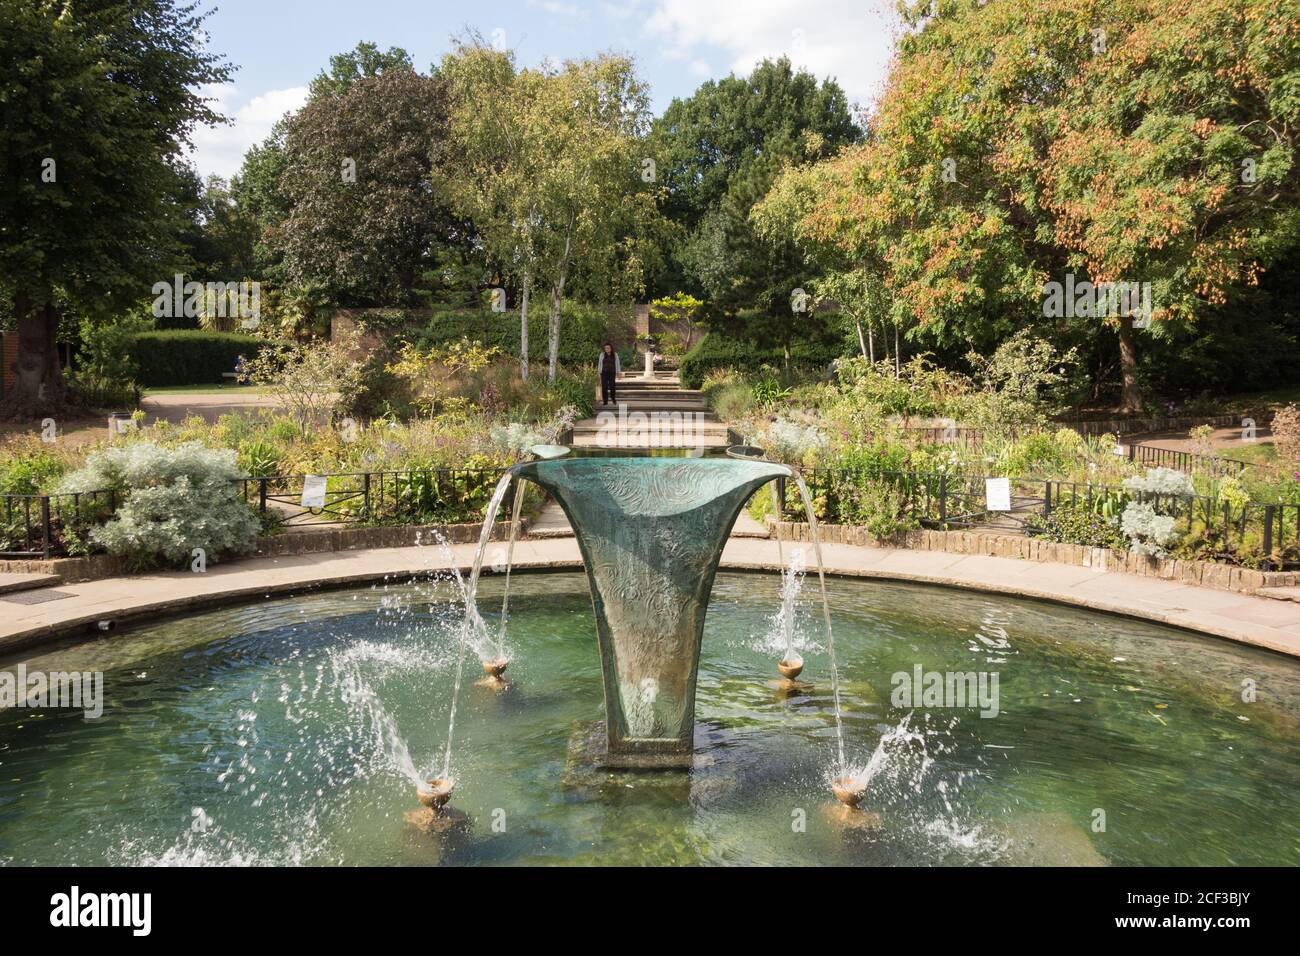 William Pye's Sibirica fountain gracing a pond in the Iris Garden, Holland Park, west London, UK. Stock Photo